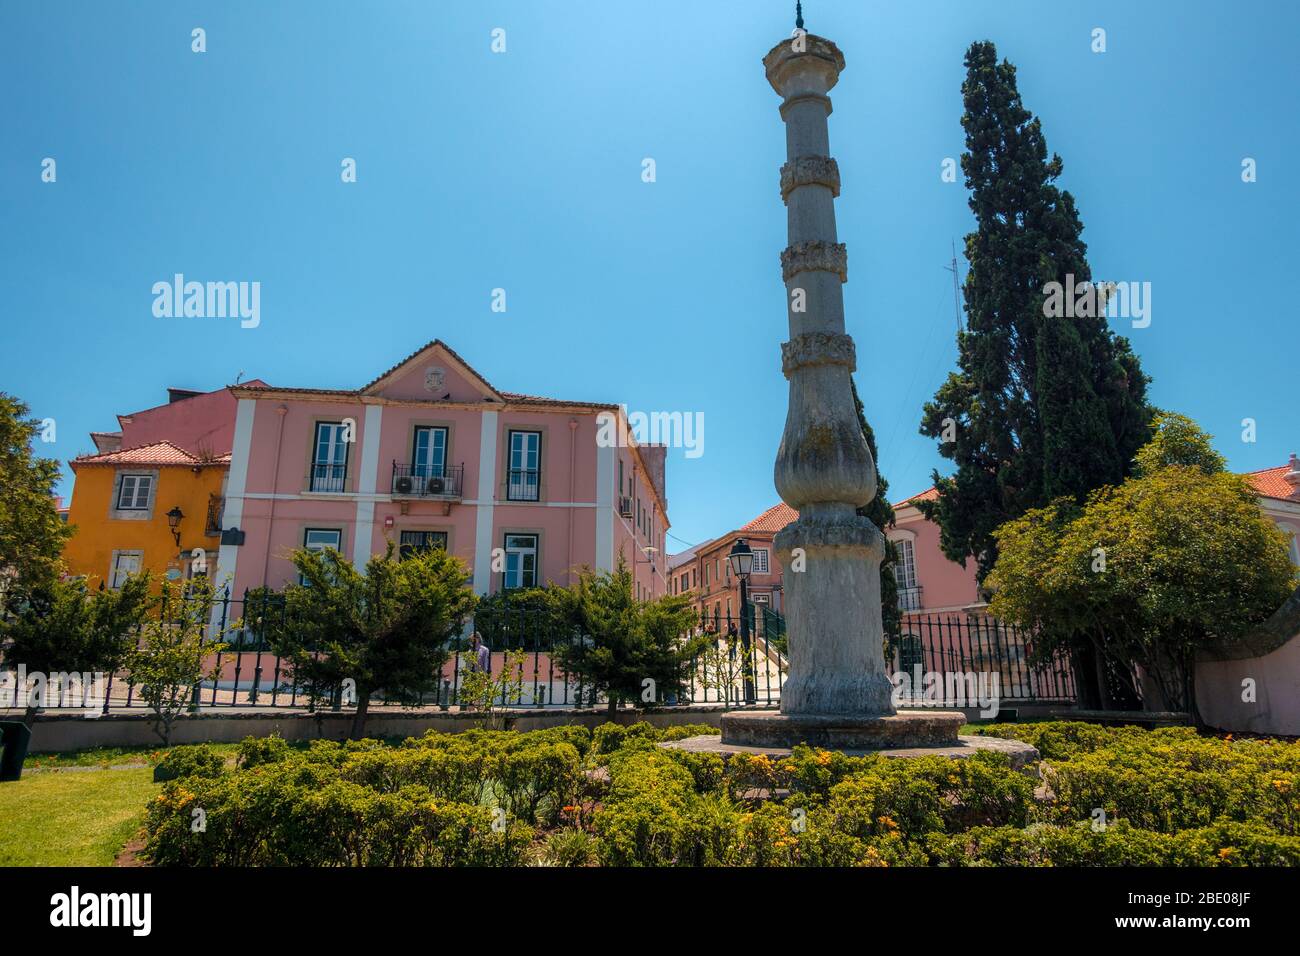 The Pelourinho or Picota , Pillory of Oeiras, a column of stone whipping post where criminals were punished and exposed in Oeiras Portugal. Stock Photo